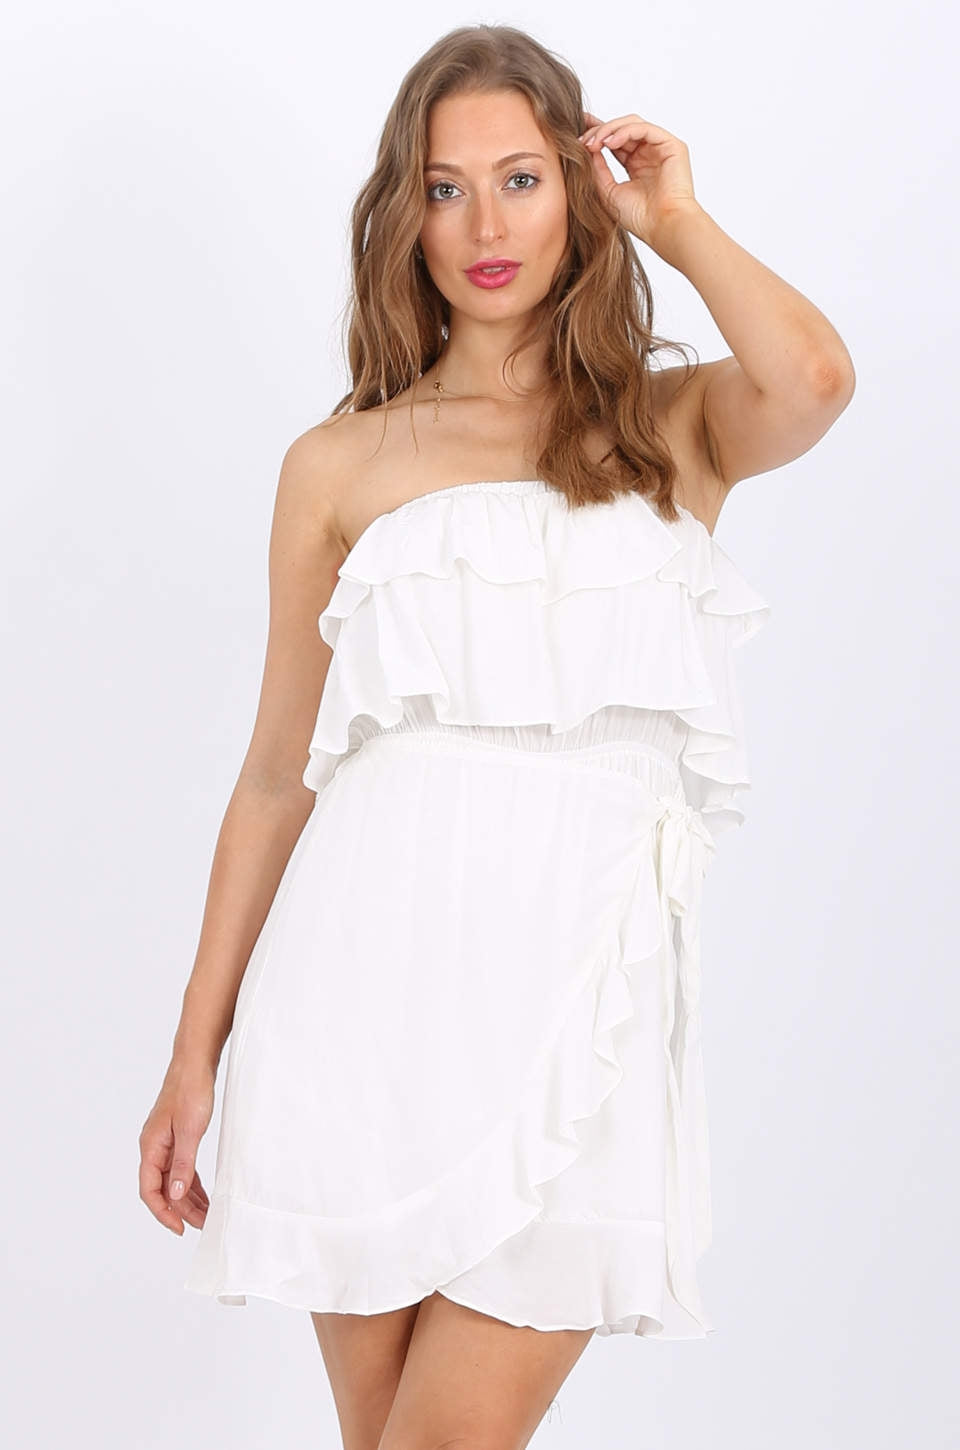 MISS PINKI Isabelle Ruffle dress in white